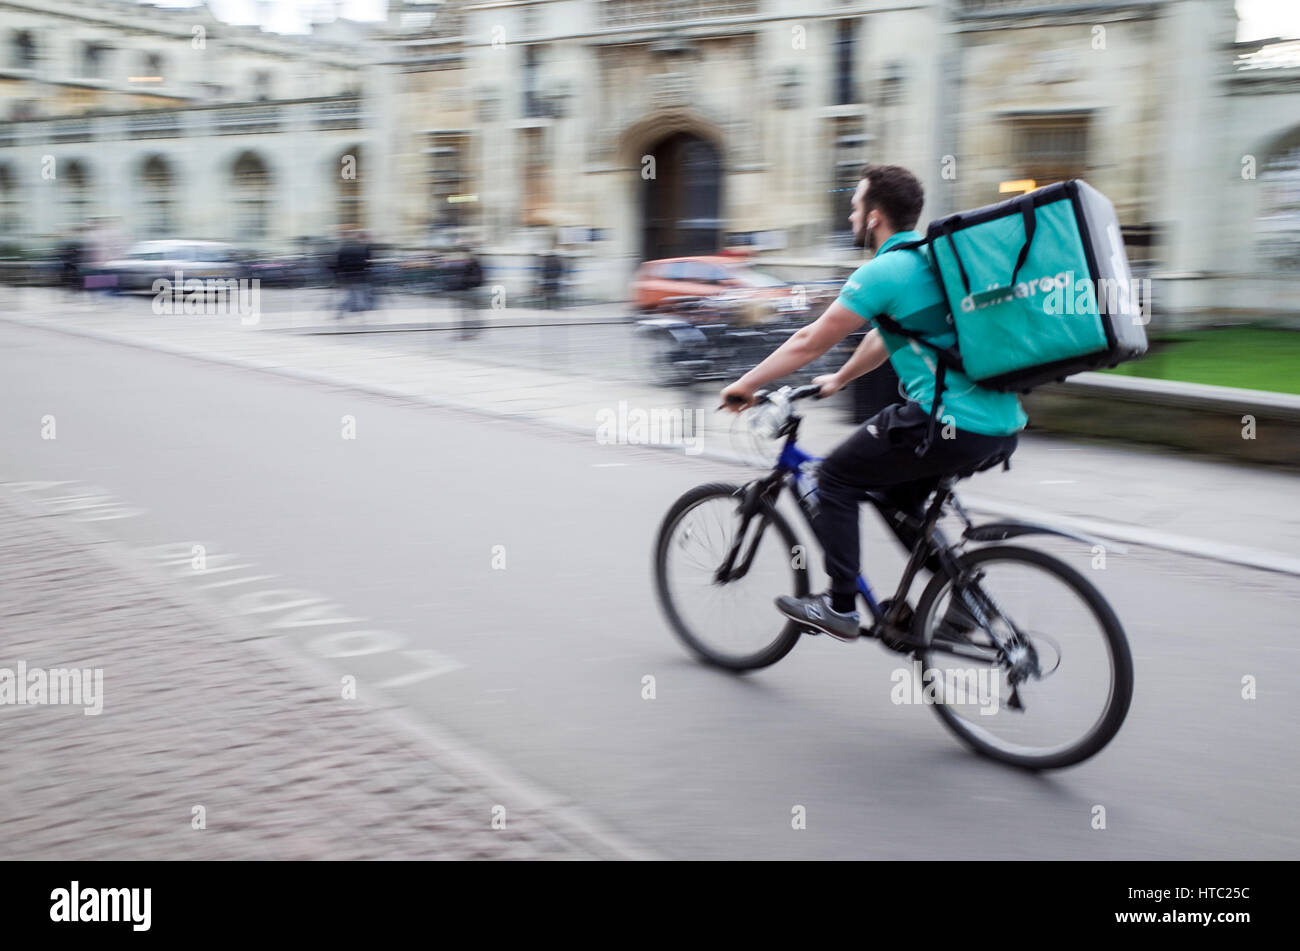 A Deliveroo food courier dashes through Central Cambridge UK (Motion Blur) Stock Photo